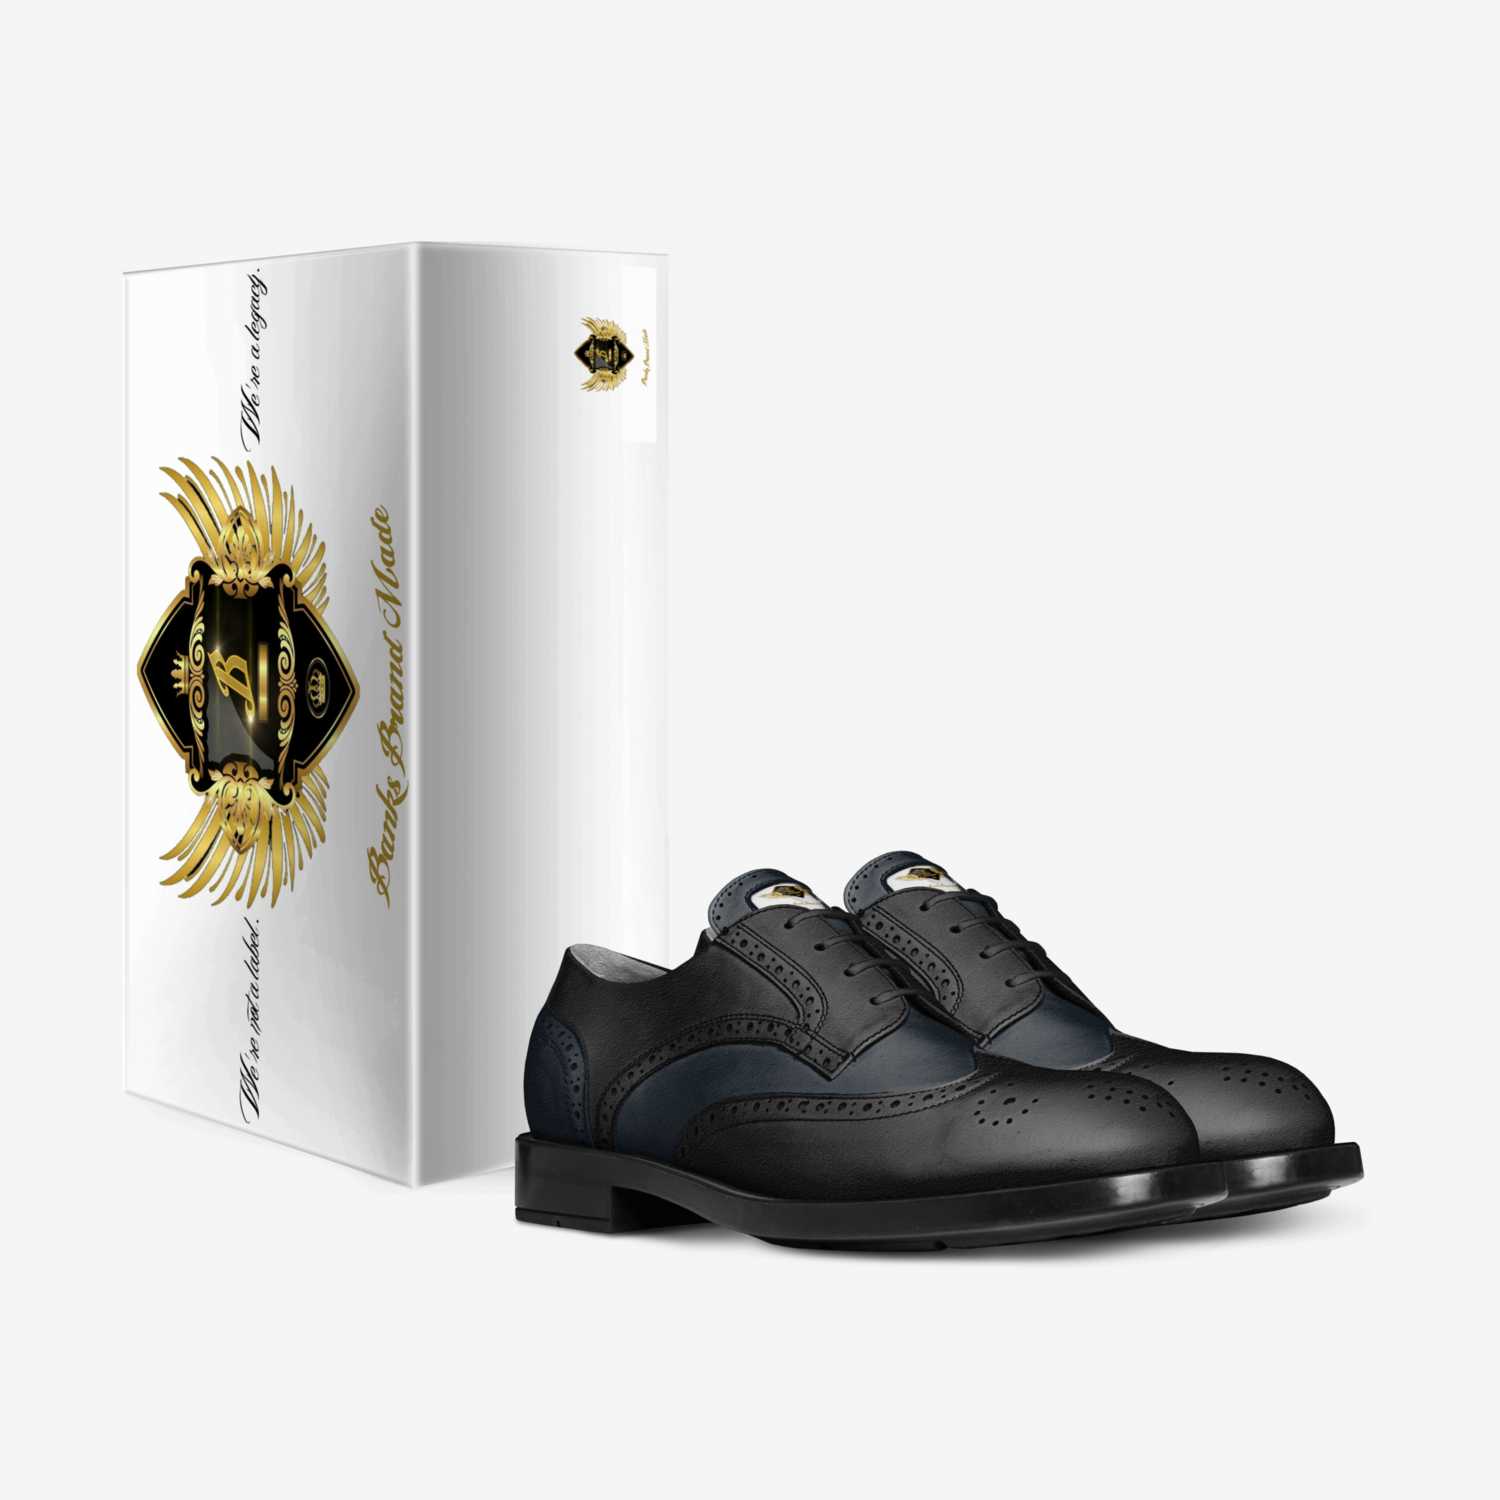 B2 Executive custom made in Italy shoes by Corey L Banks | Box view